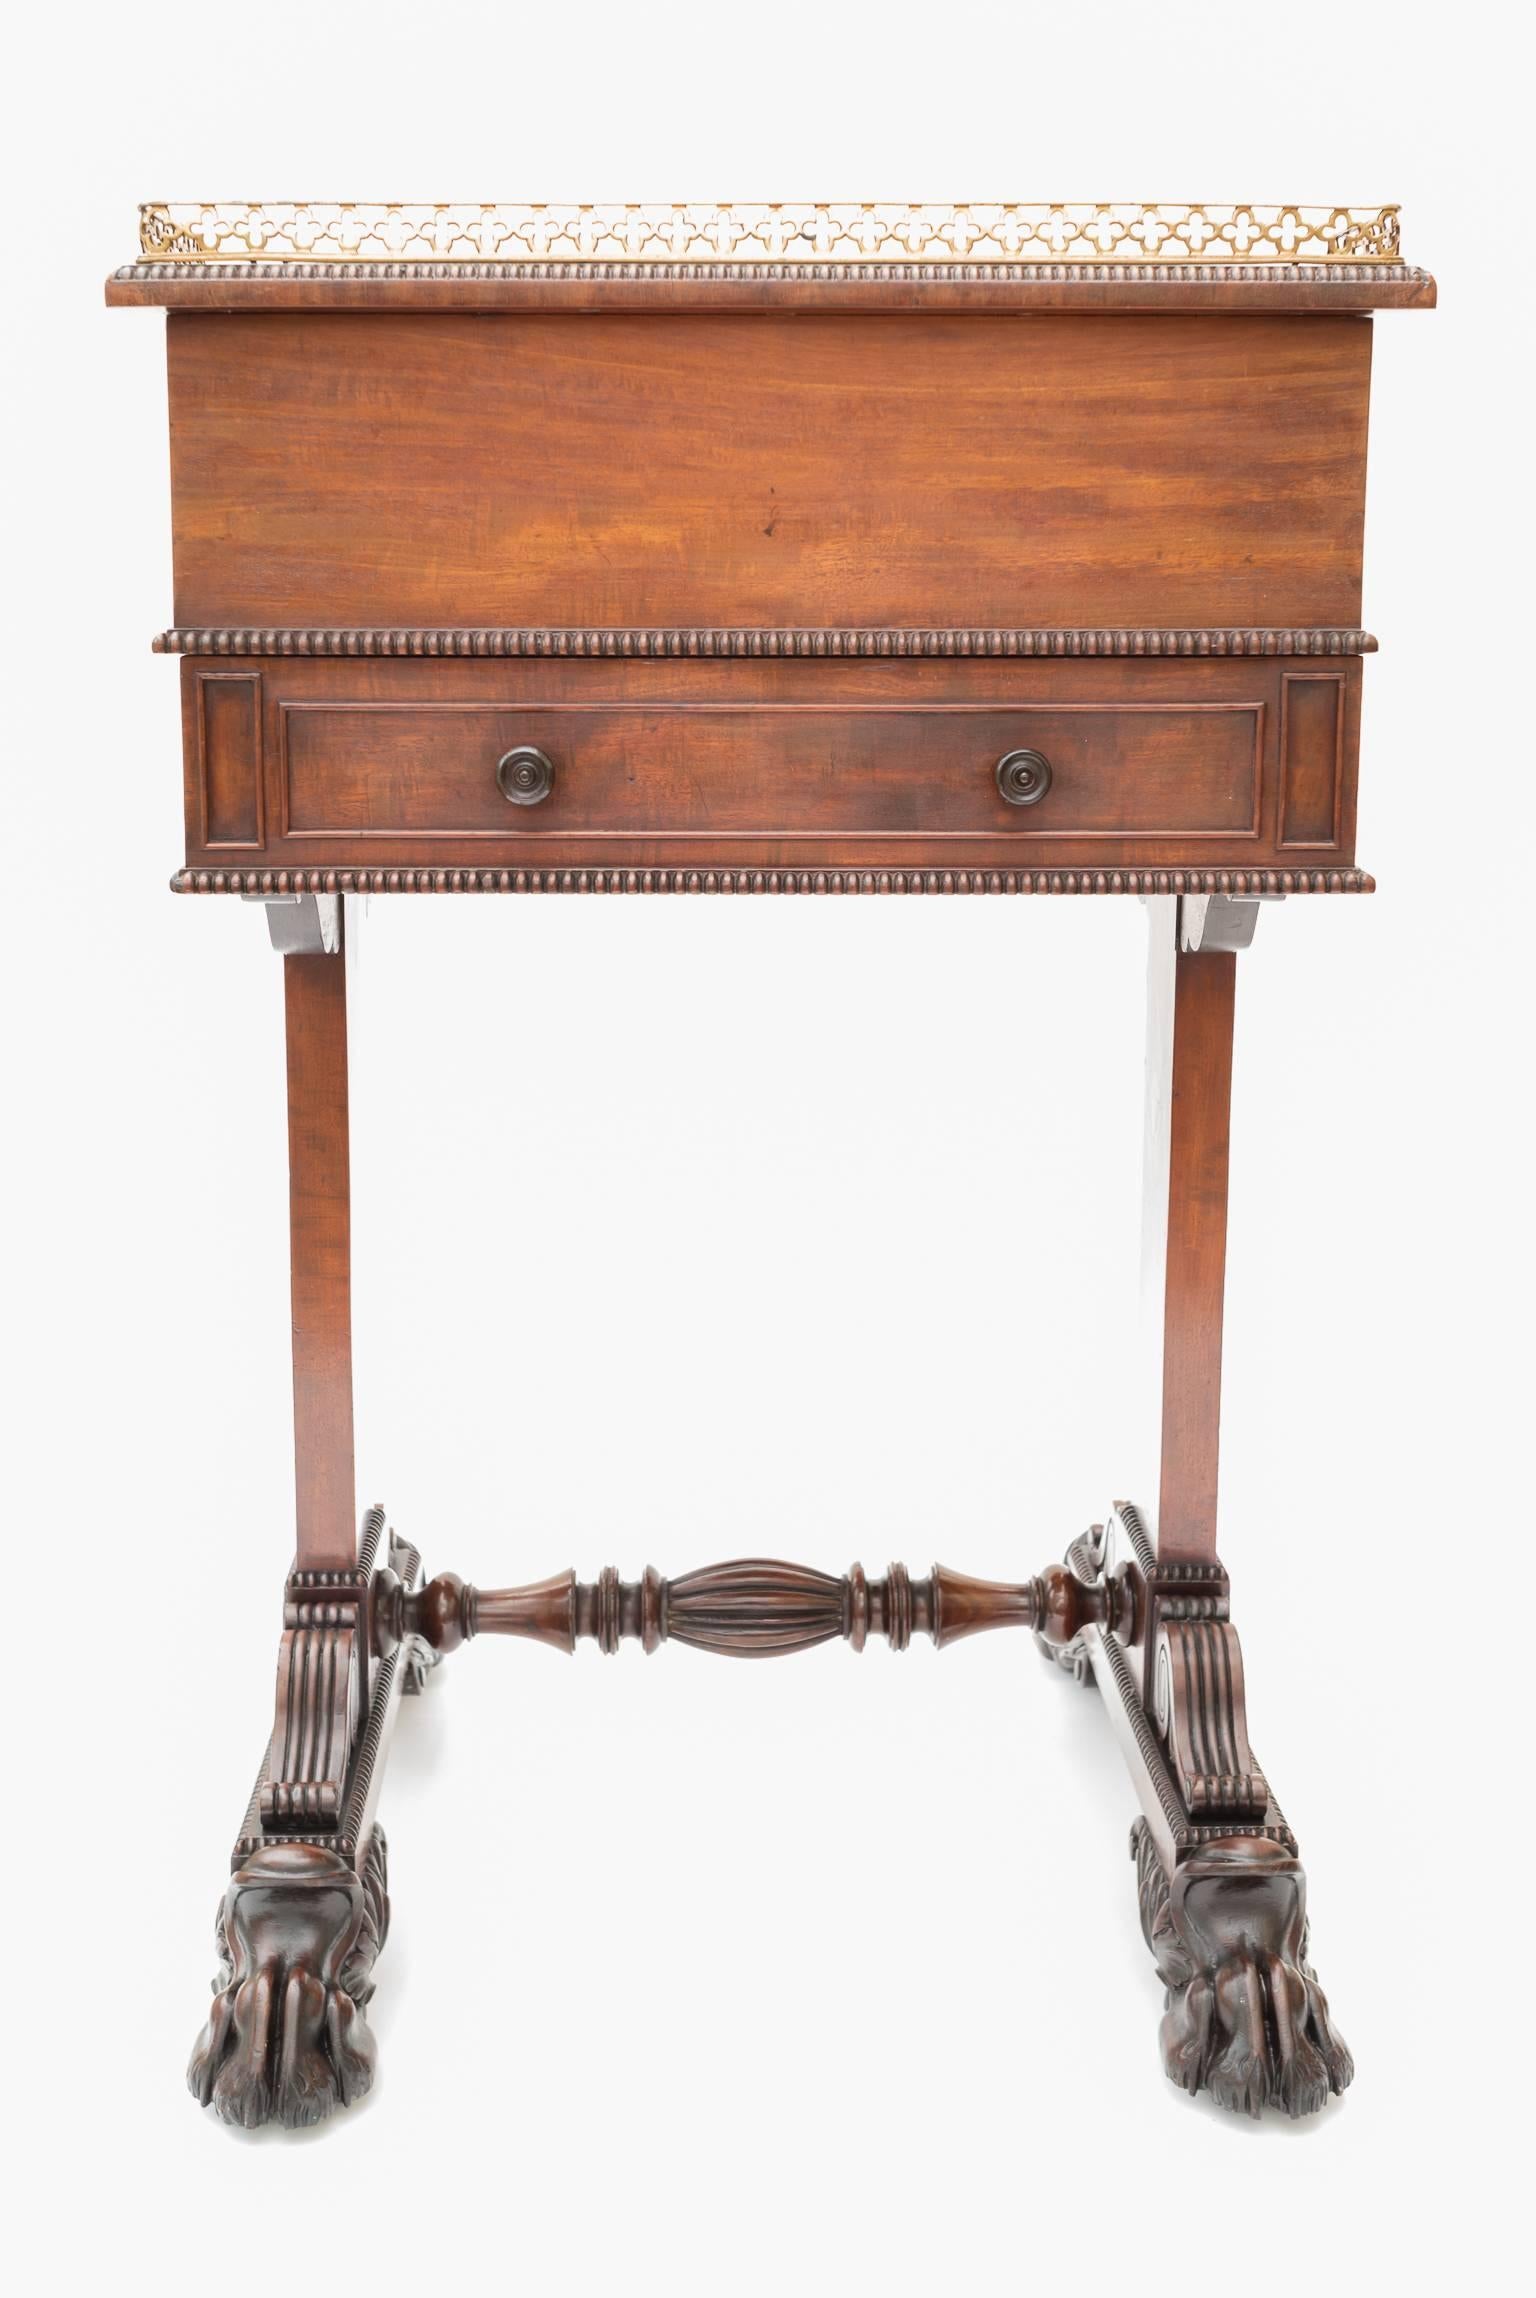 A fine Regency flame mahogany davenport
Attributed to Gillows, circa 1815
An unusual pattern with twin pedestal supports ending with claw feet.
Pull-out slide to three sides and a draw to the front.
Label inside front draw
W.J Mansell
Cabinet